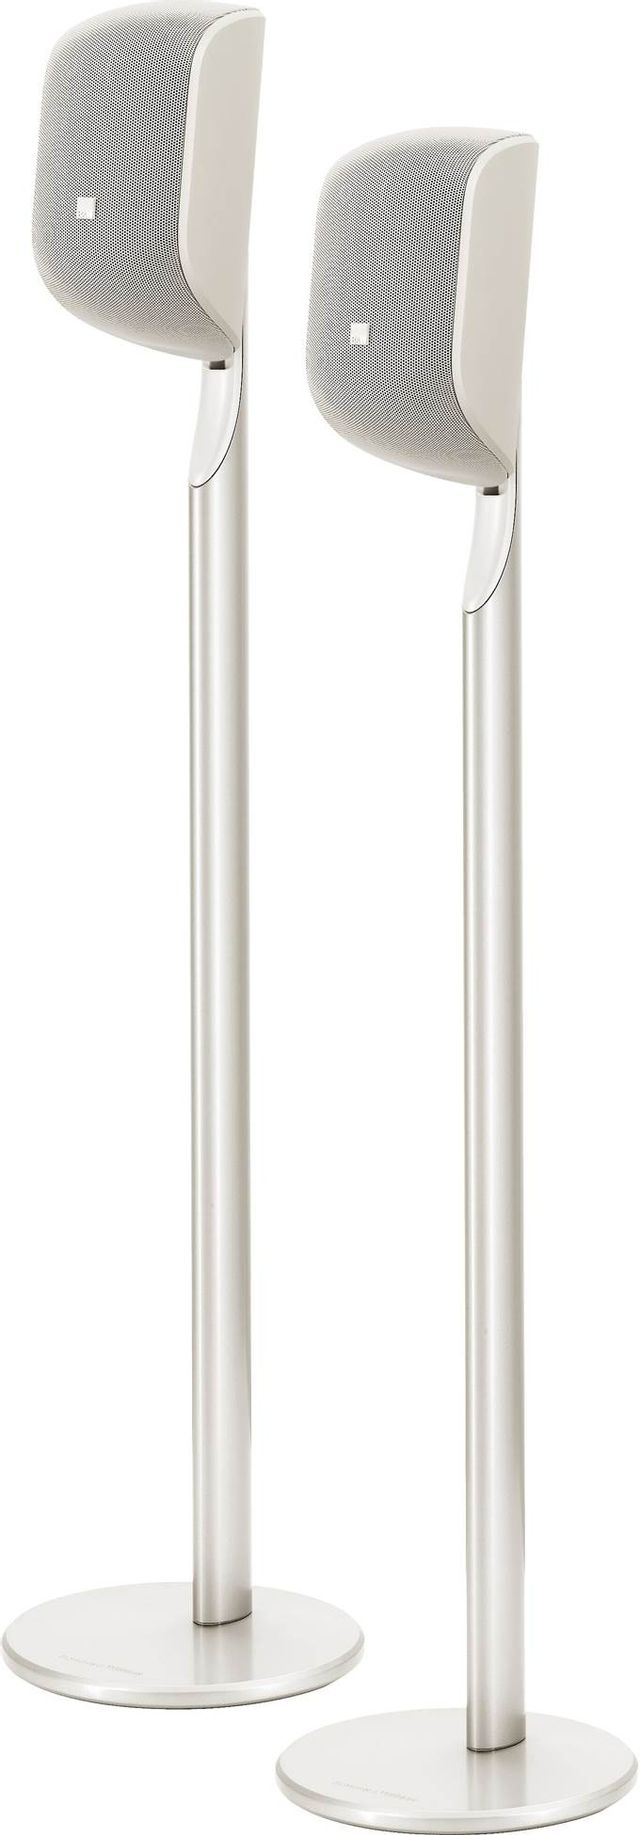 Bowers & Wilkins M-1 Stand Matte White Speaker Stands (Pair) 2